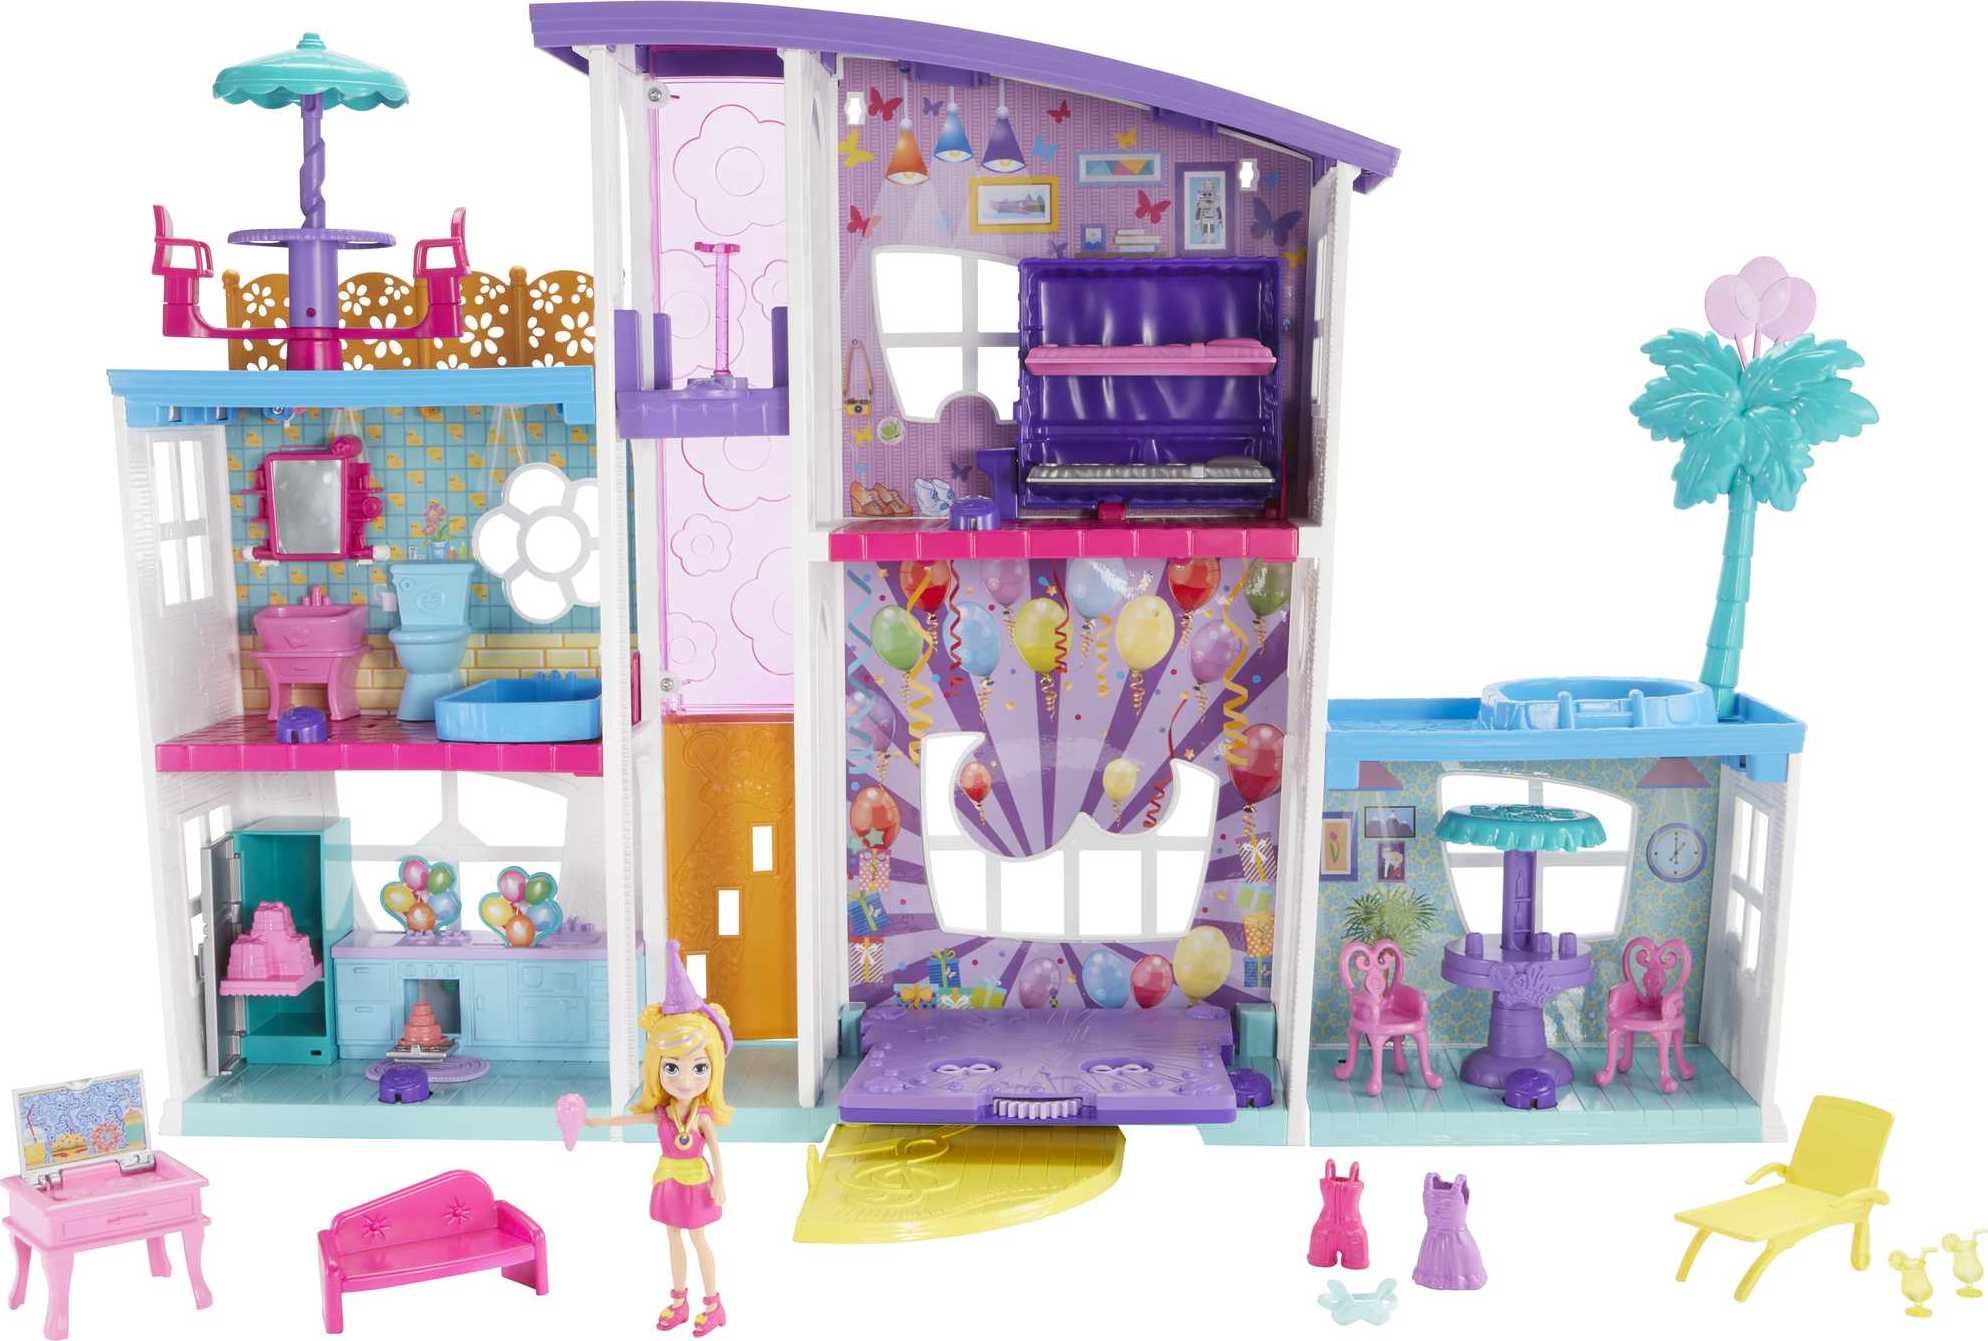 Polly Pocket Poppin' Party Pad Is a Transforming Playhouse! - image 1 of 7